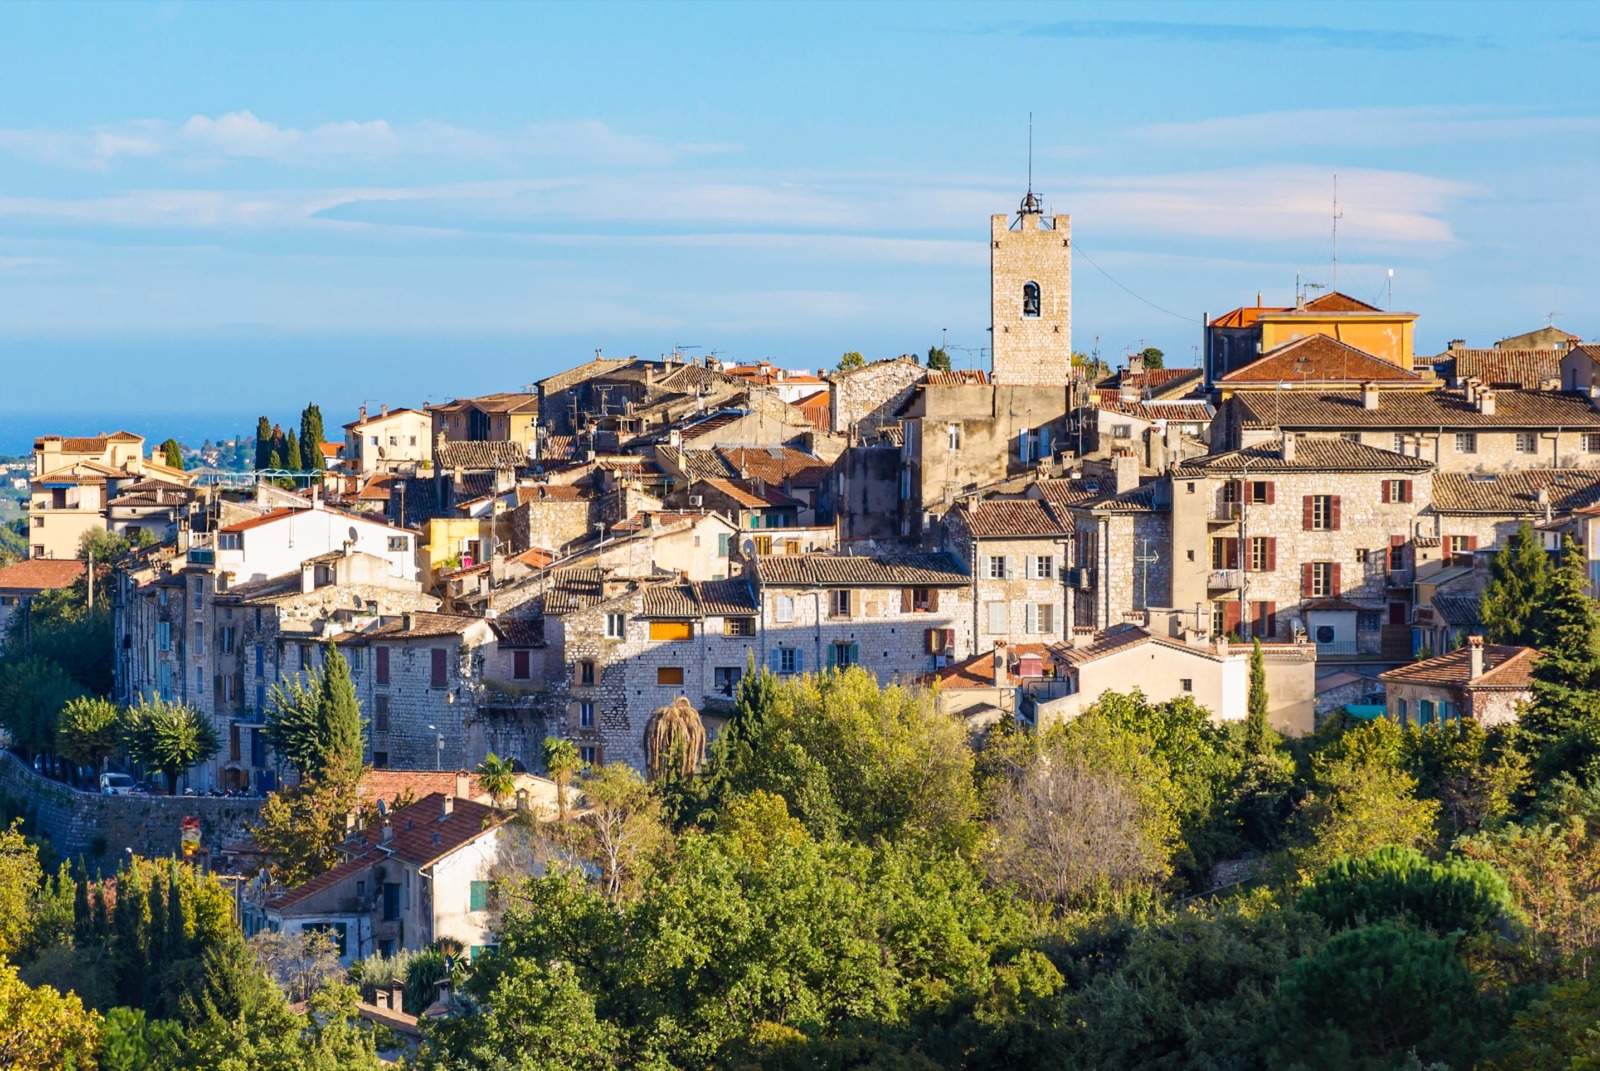 Vence © Myrabella - licence [CC BY-SA 3.0] from Wikimedia Commons